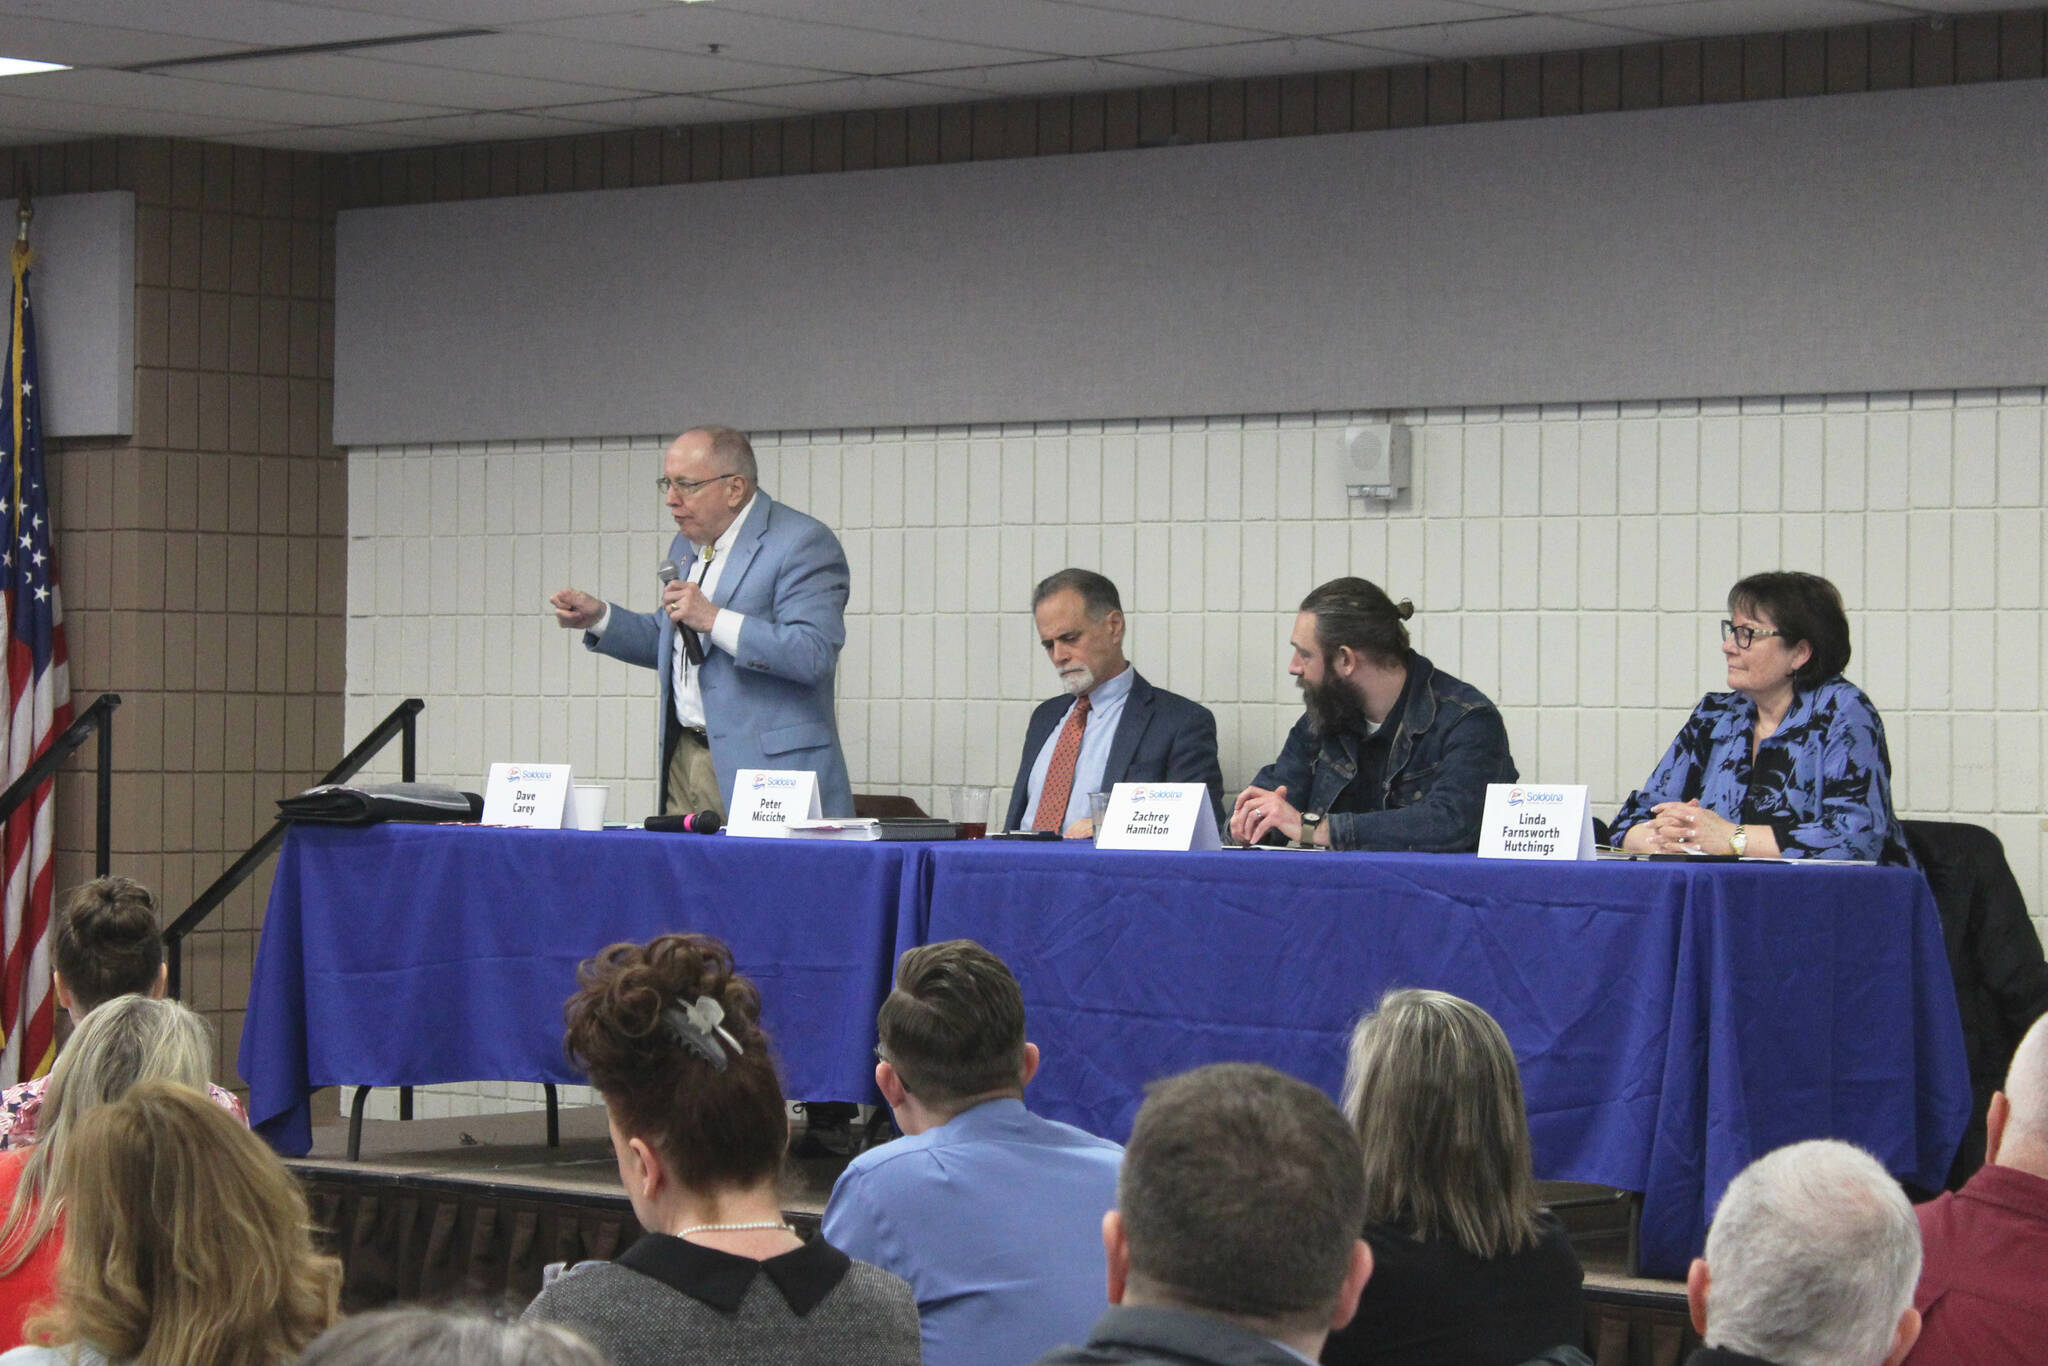 From left, borough mayoral candidates Dave Carey, Peter Micciche, Zachary Hamilton and Linda Farnsworth-Hutchings participate in a candidate forum held at the Soldotna Regional Sports Complex on Wednesday, Feb. 8, 2023, in Soldotna, Alaska. (Ashlyn O’Hara/Peninsula Clarion)